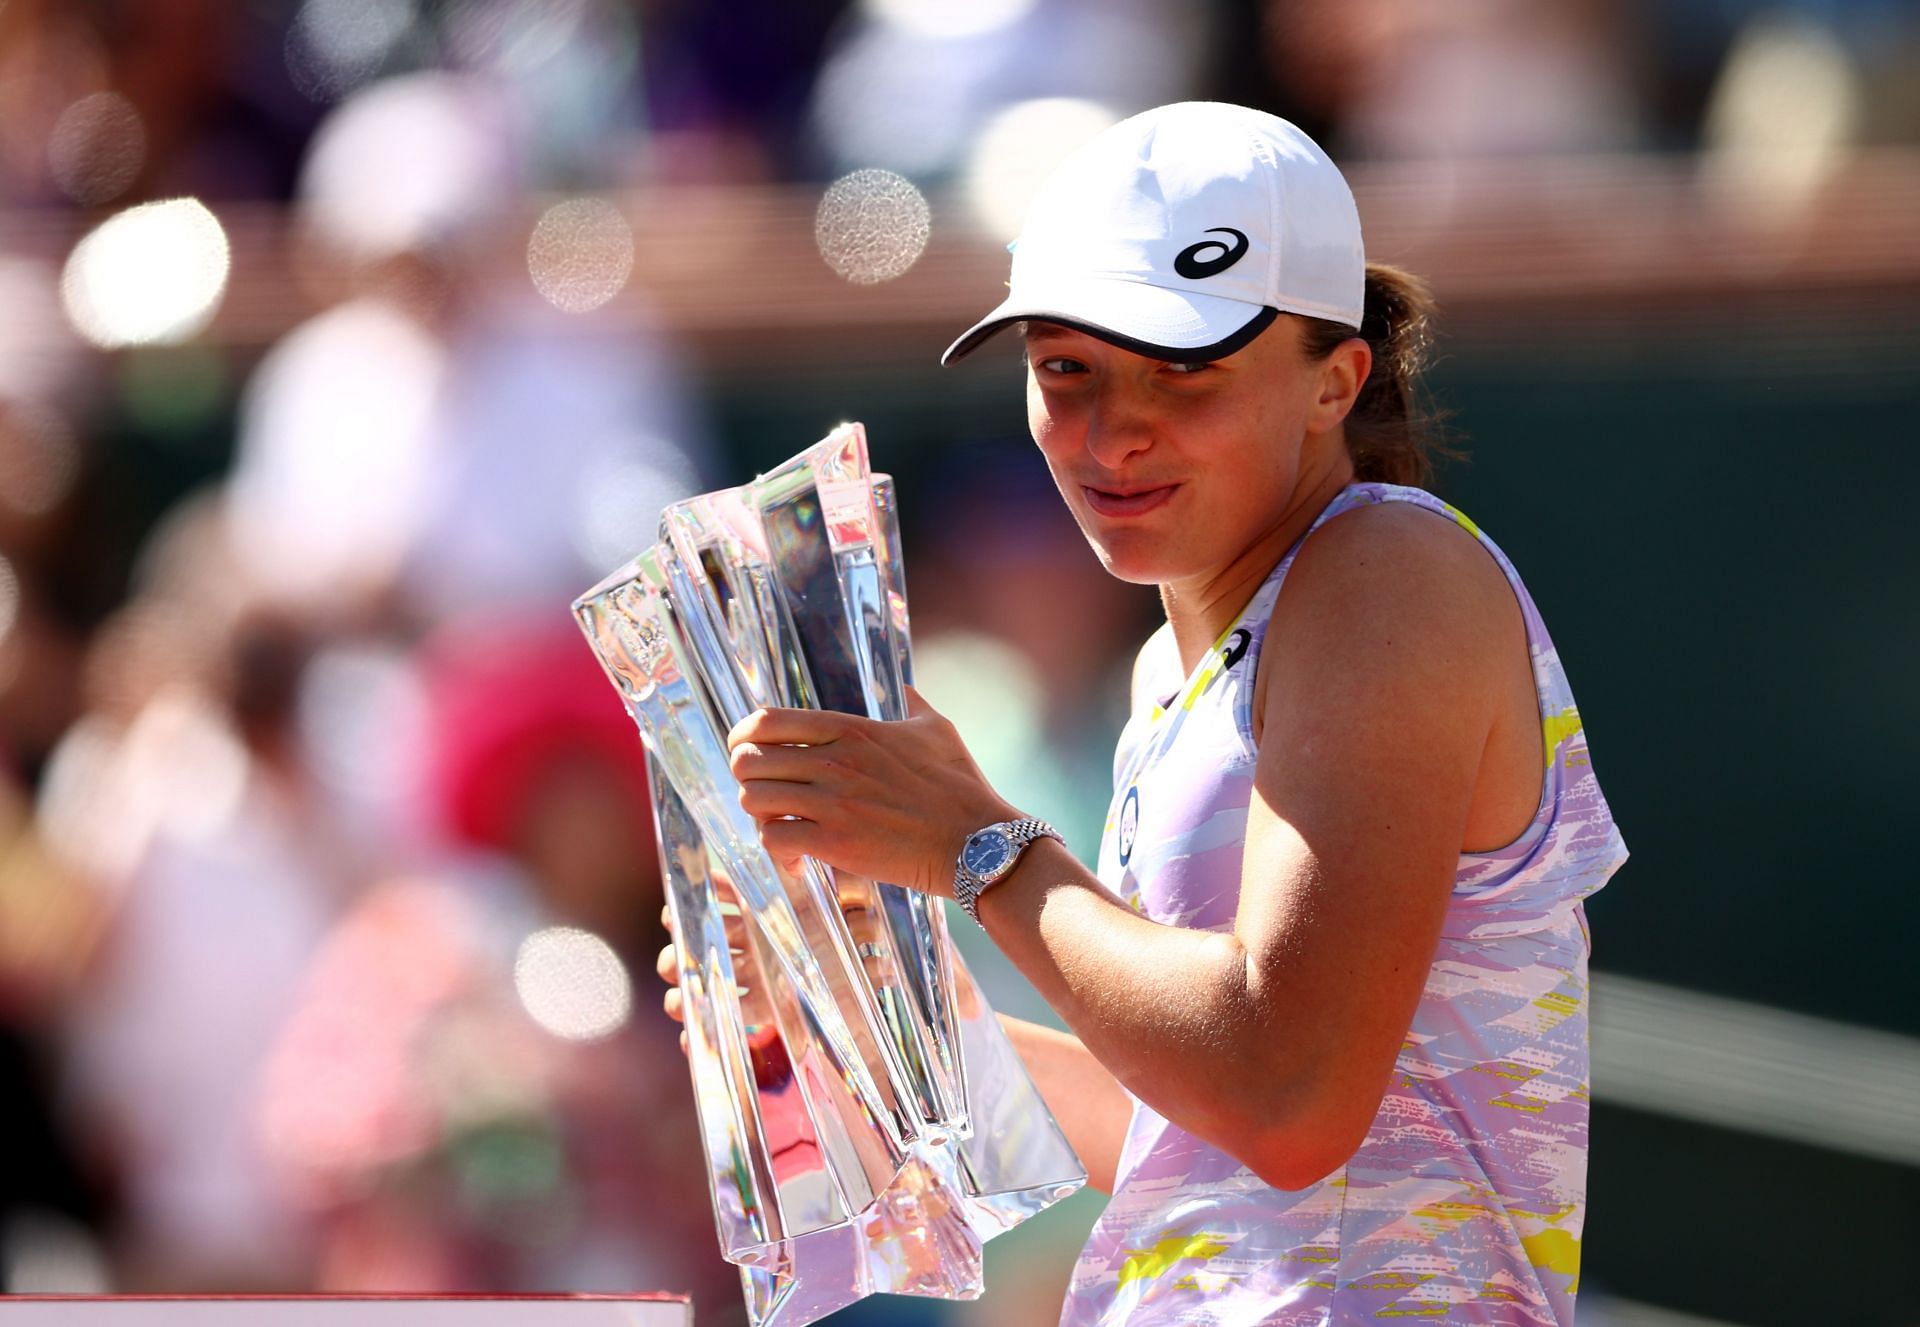 Iga Swiatek will aim to win her third consecutive title this year at the Miami Open.